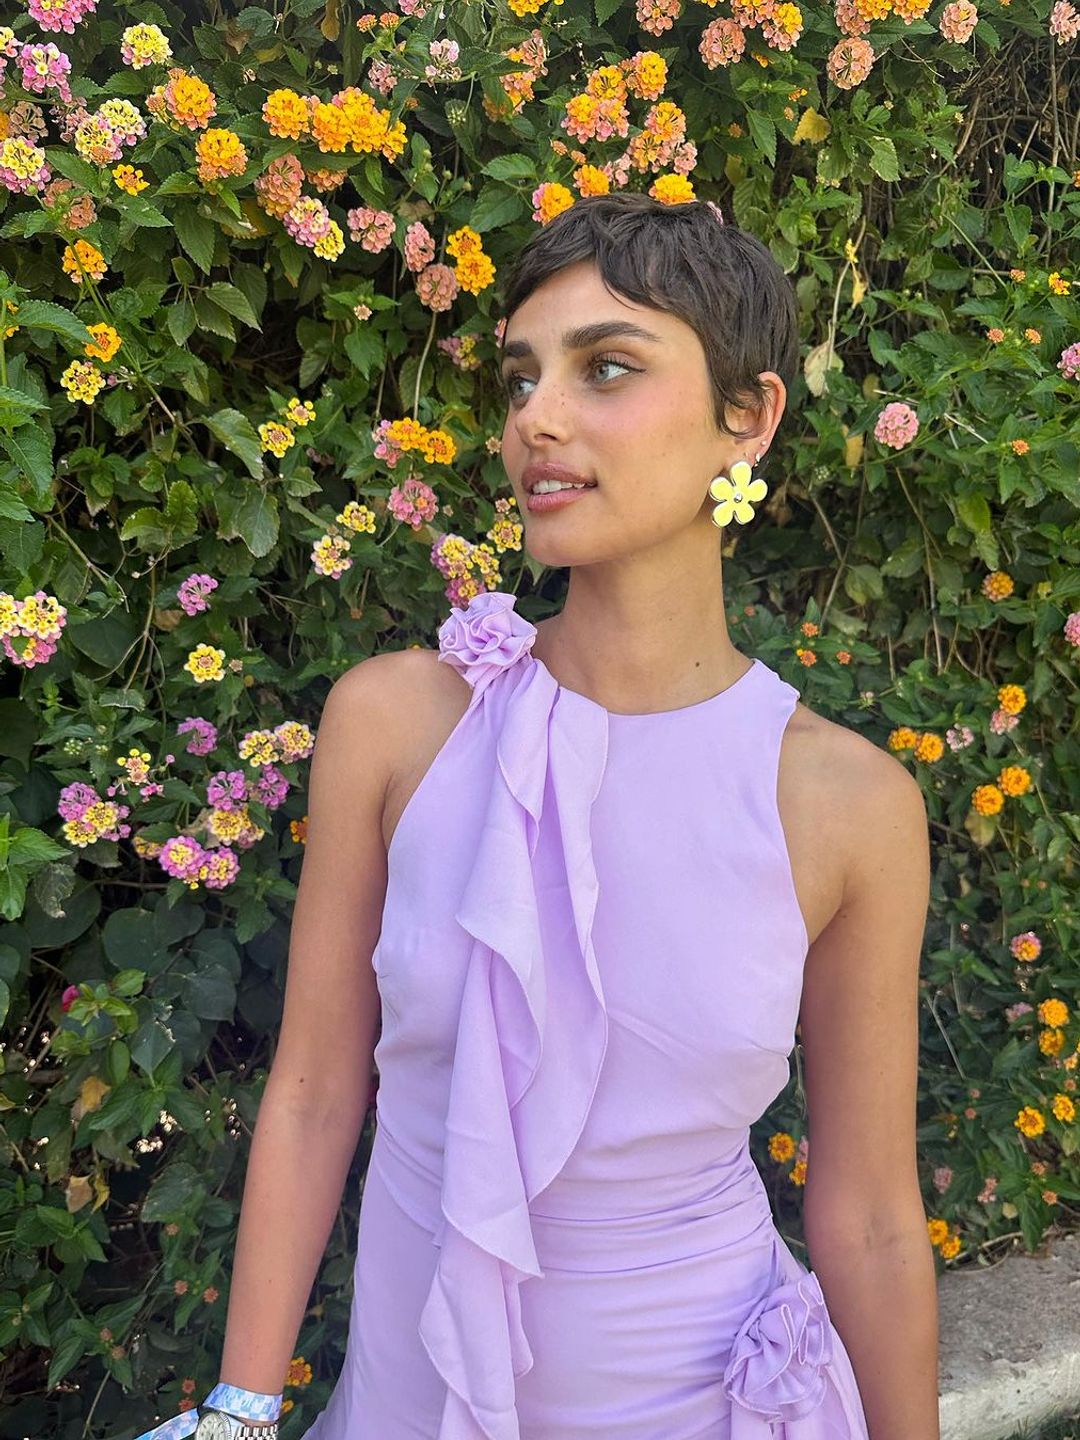 Taylor Hill rocked the style at Coachella this year